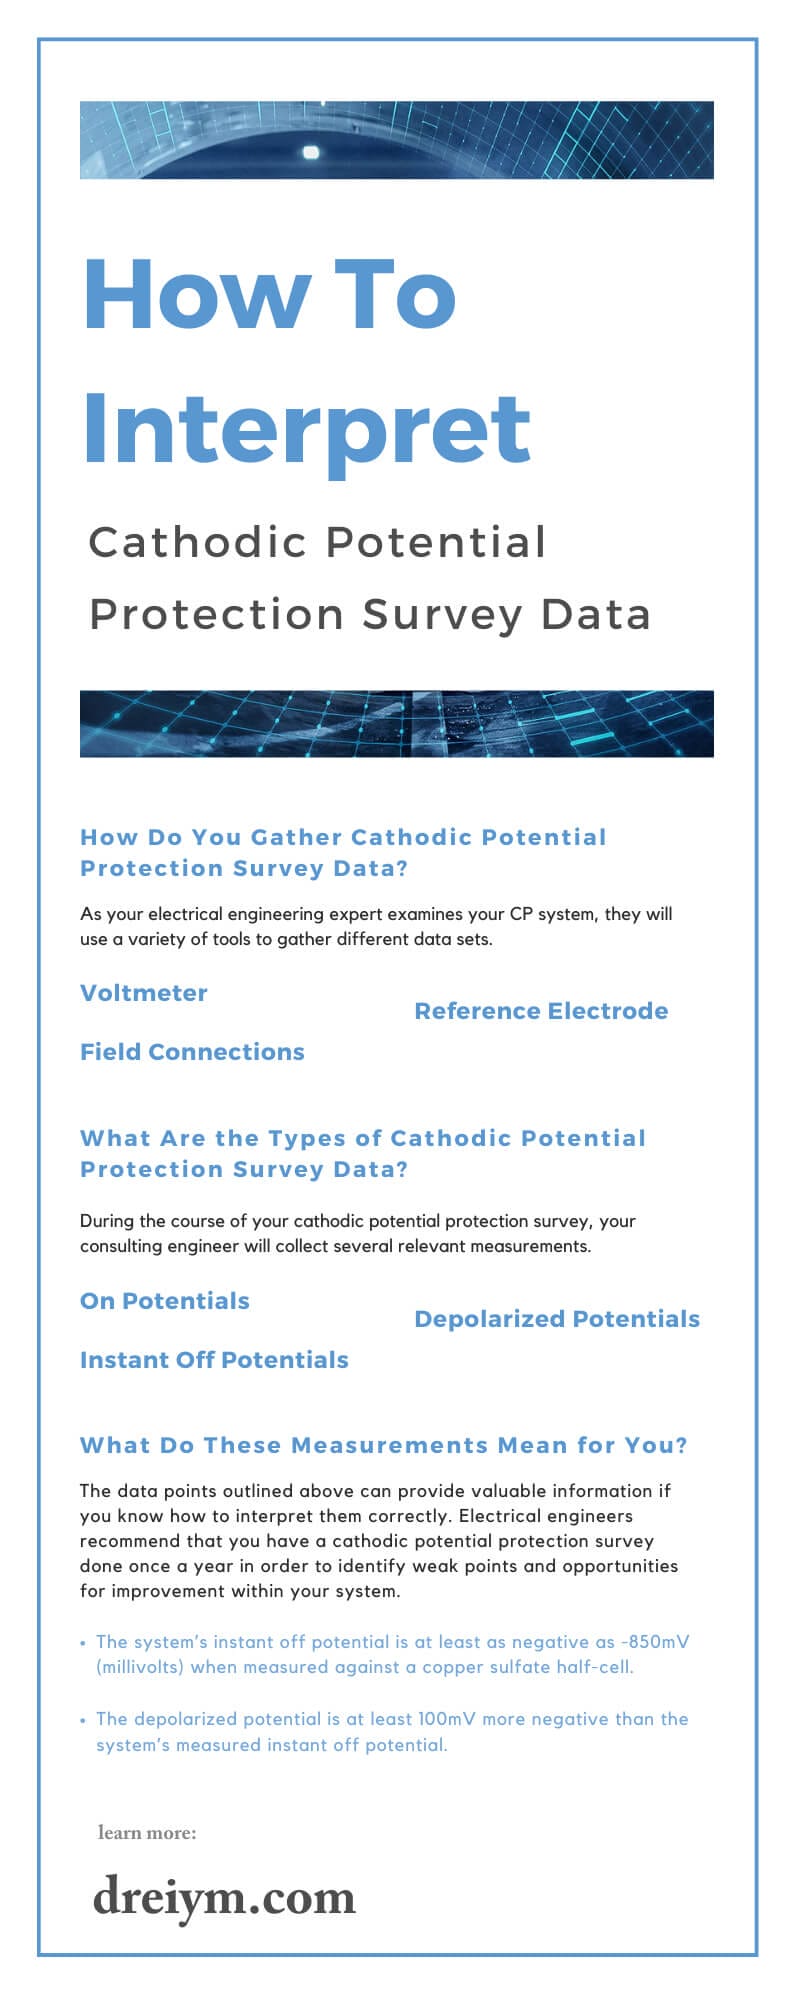 How To Interpret Cathodic Potential Protection Survey Data